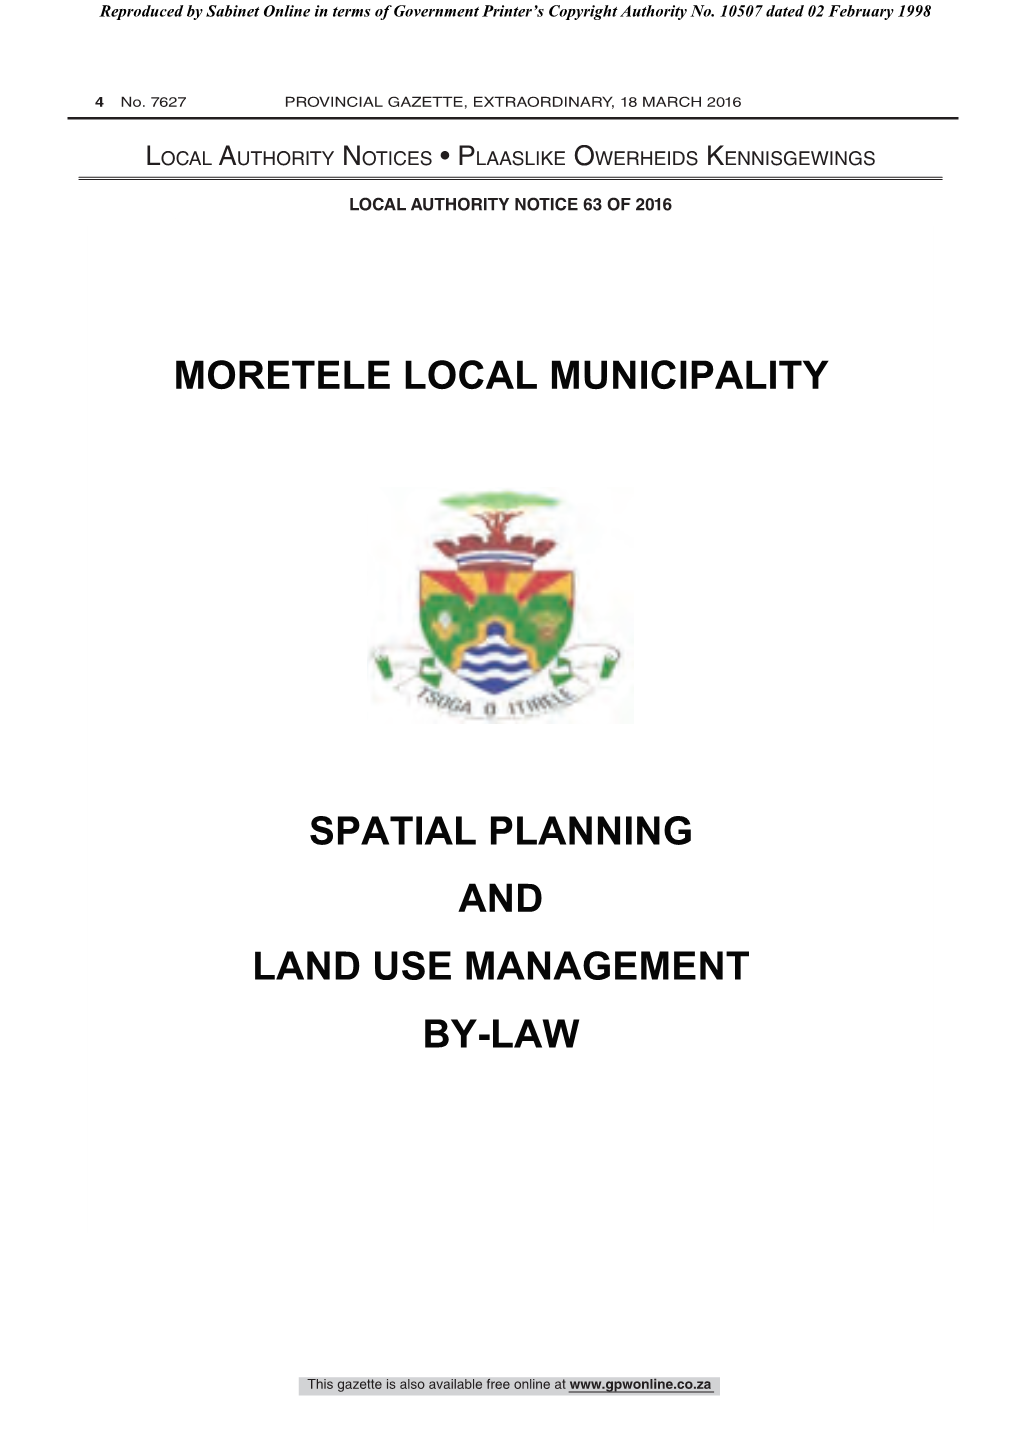 Moretele Local Municipality Spatial Planning and Land Use Management By-Law